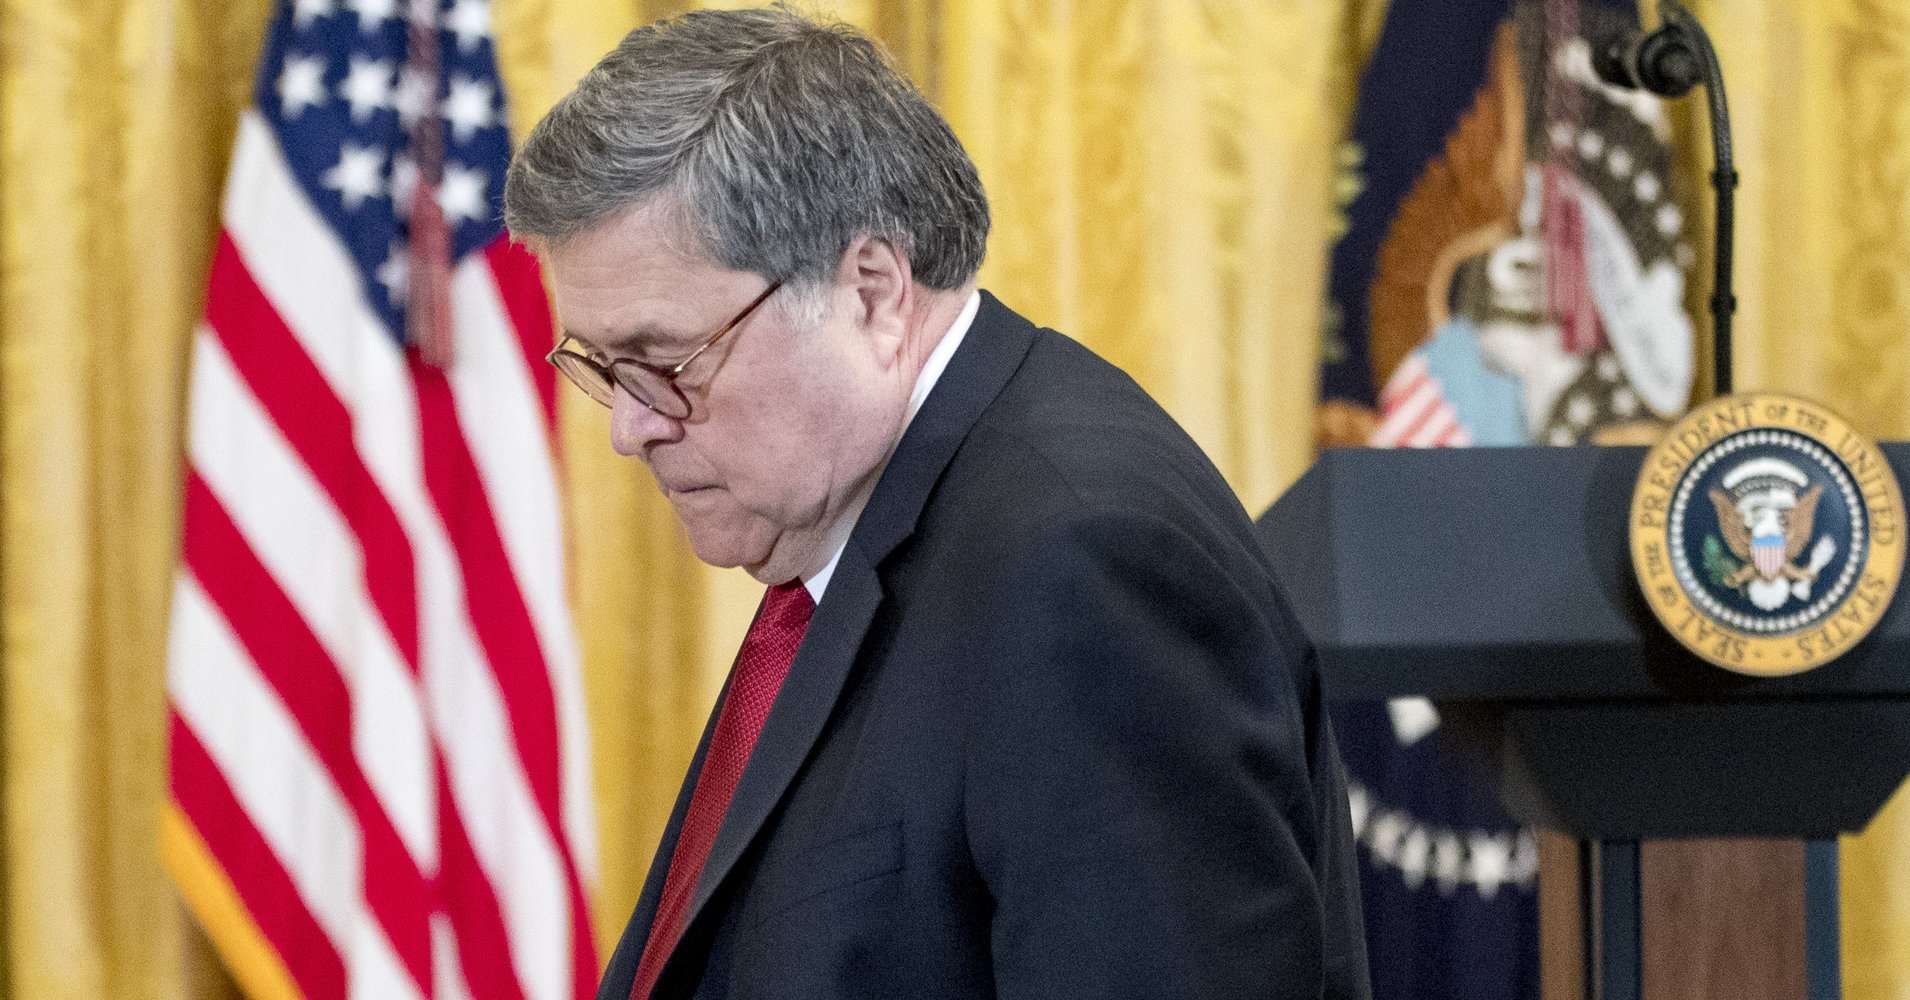 image for Robert Mueller’s Team Says Report Had More Troubling Details About Trump Than William Barr Revealed